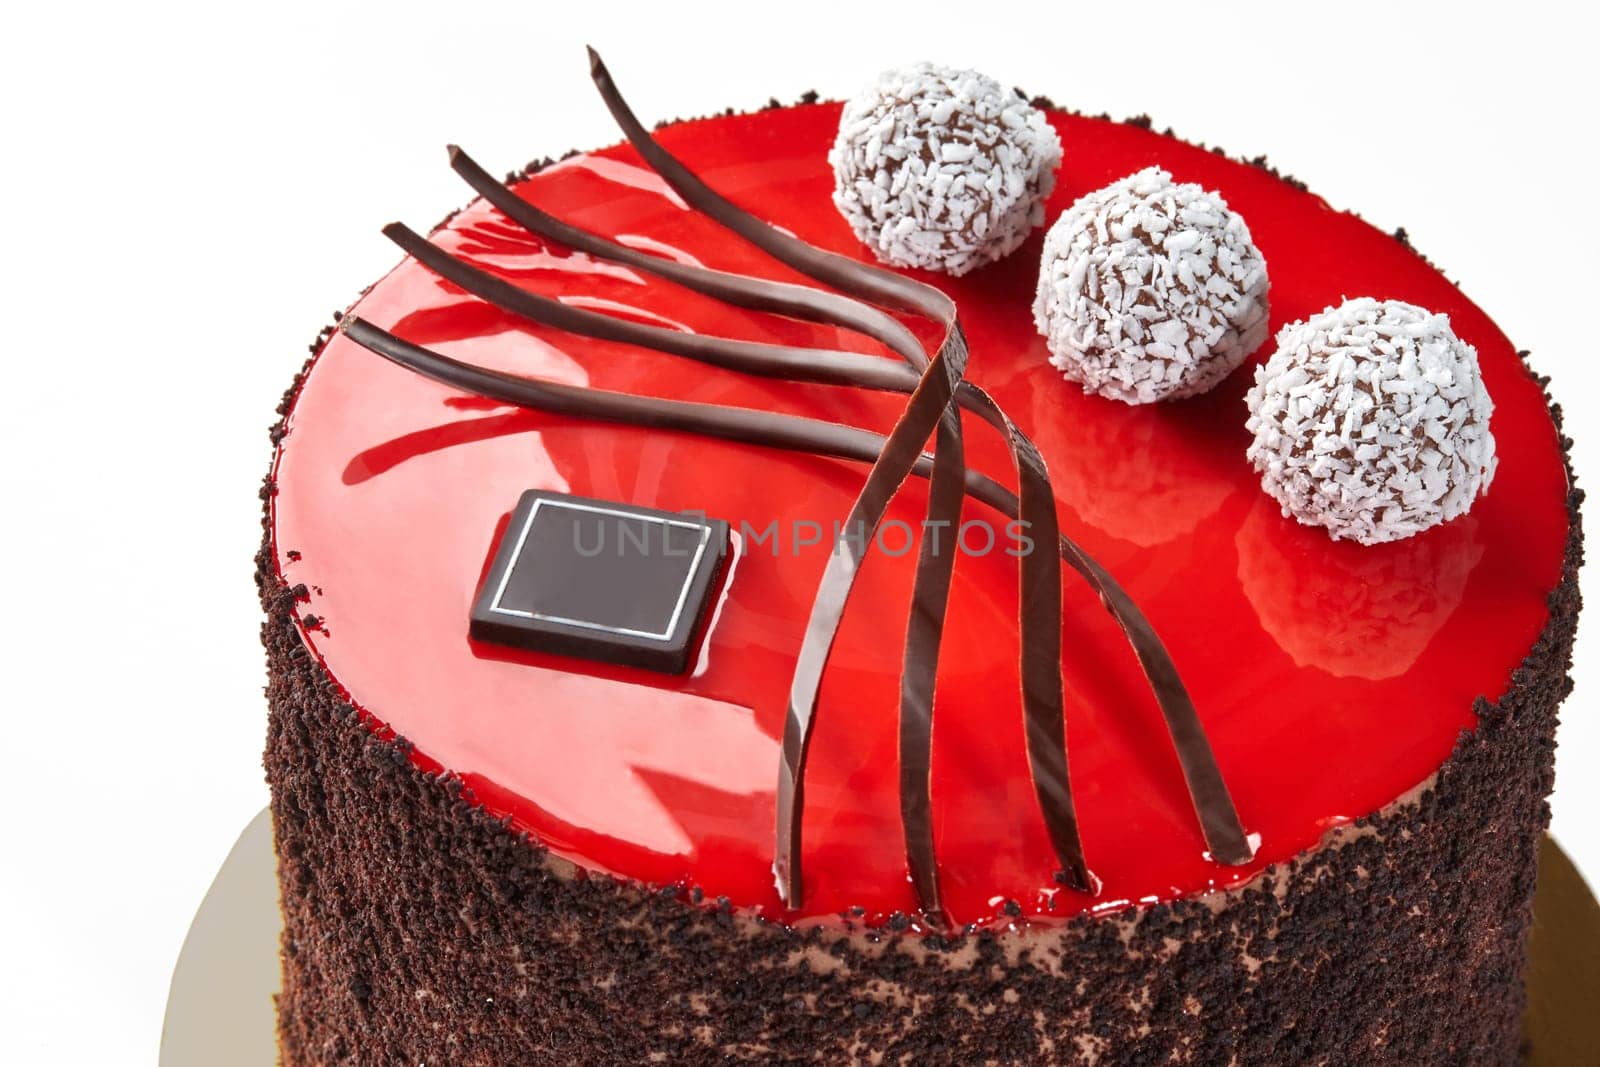 Stylish chocolate cake with glossy red glaze, adorned with dark chocolate curls and white coconut truffles. Handcrafted confectionery